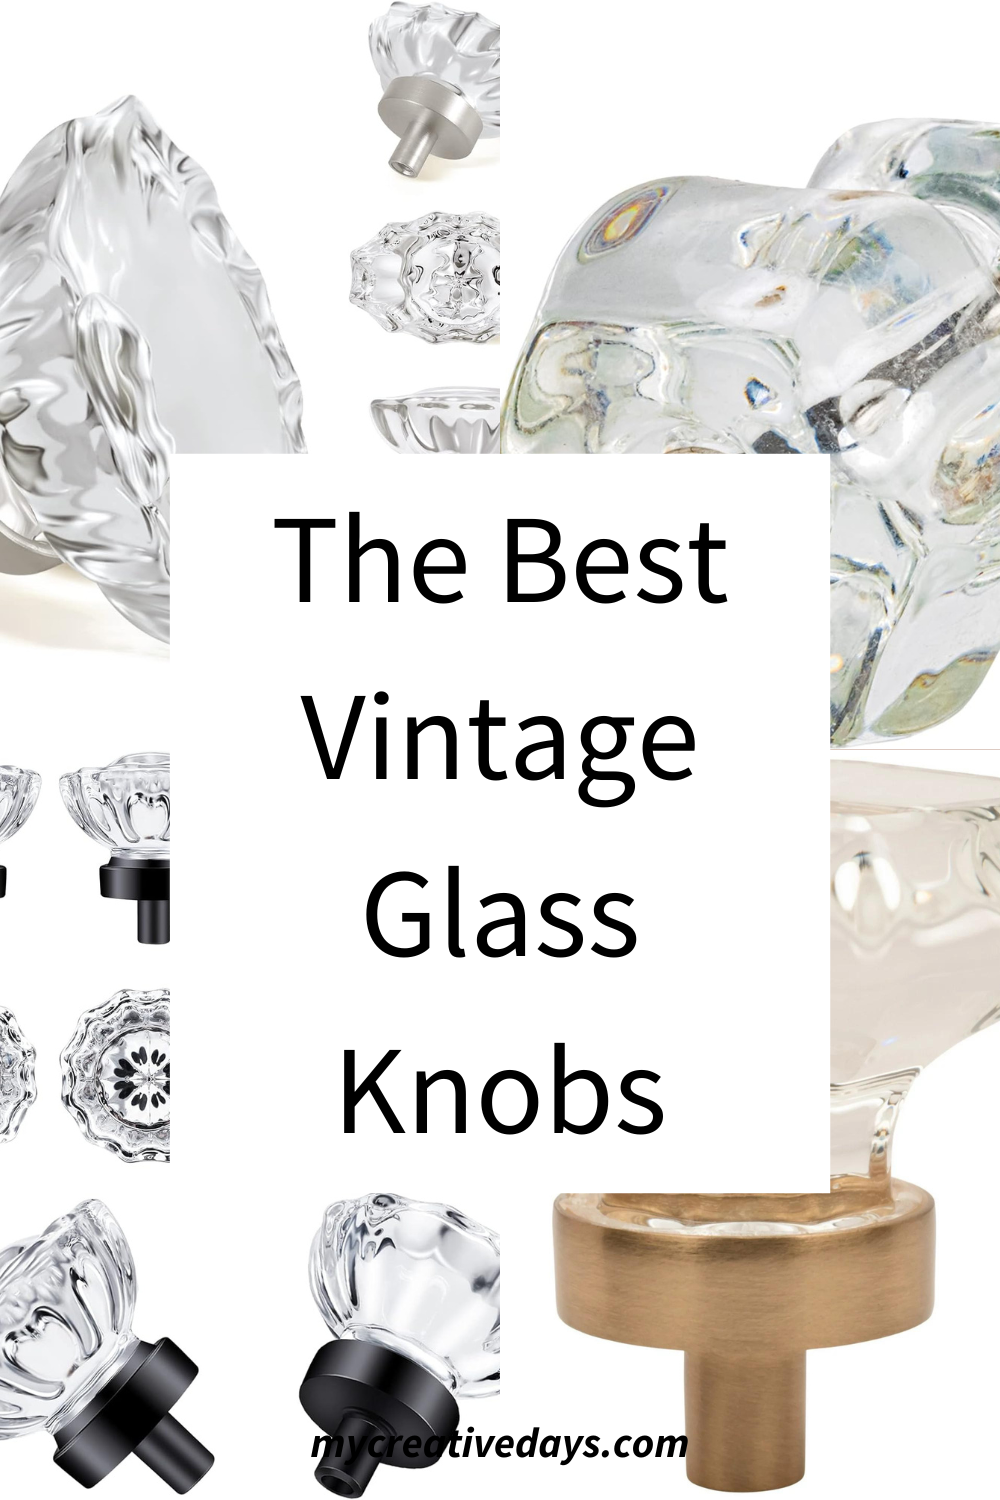 The Best Vintage Glass Knobs